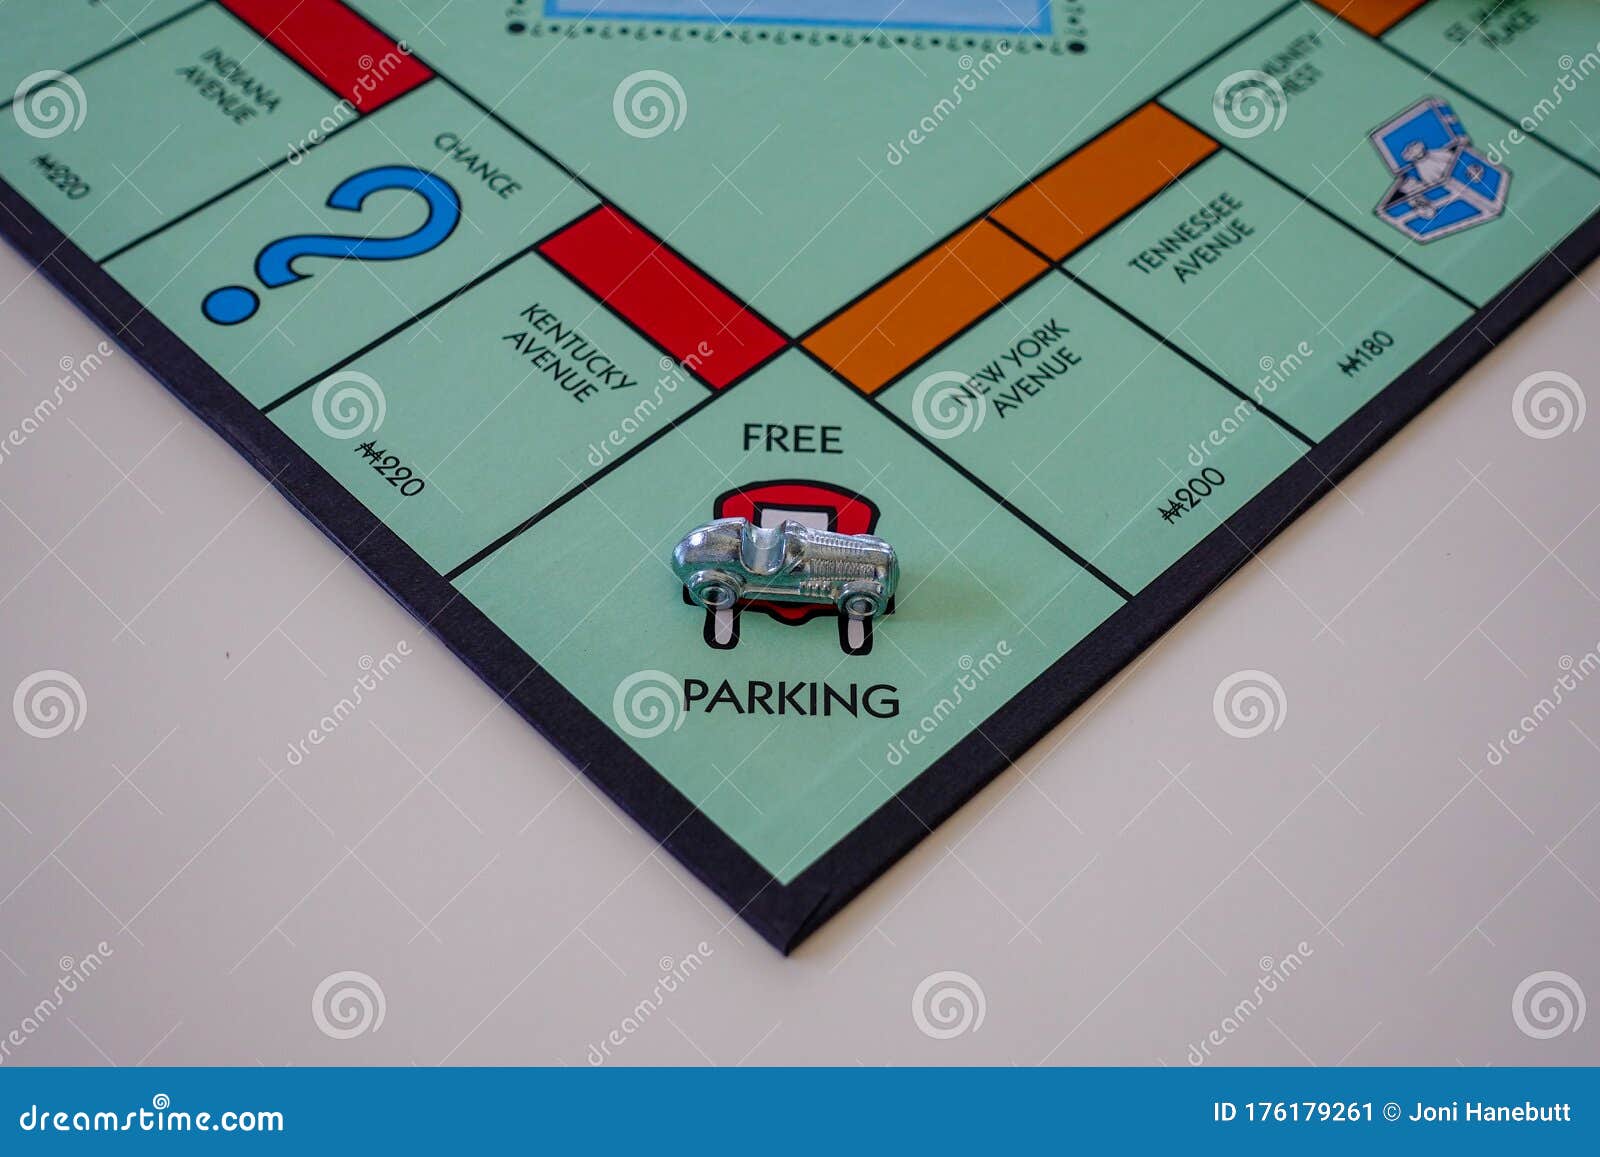 Car On The Free Parking Space In The Game Of Monopoly By Hasbro On A 